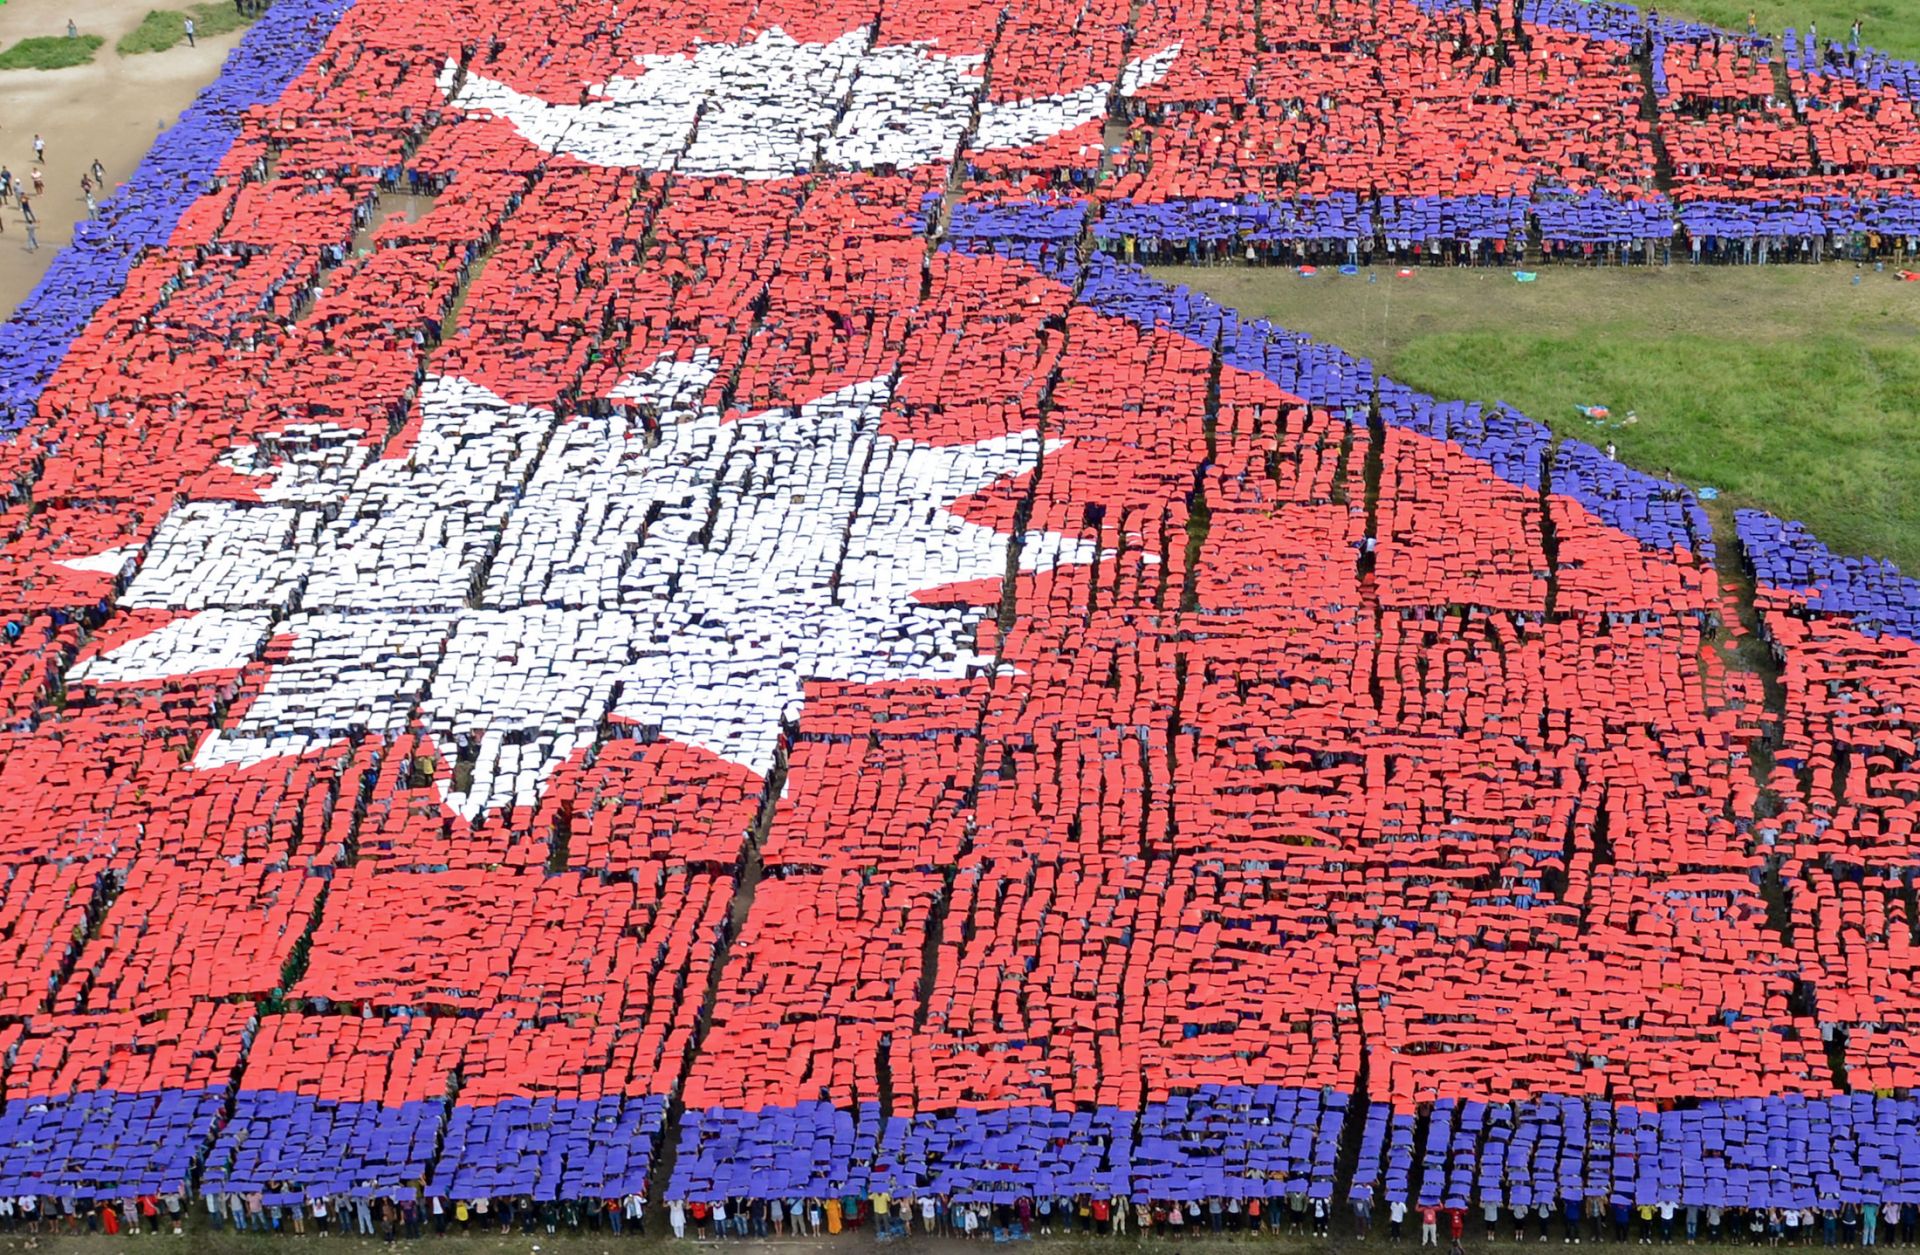 An aerial view of the Nepalese national flag formed by more than 35,000 people Aug. 23, 2014, in central Kathmandu, Nepal.